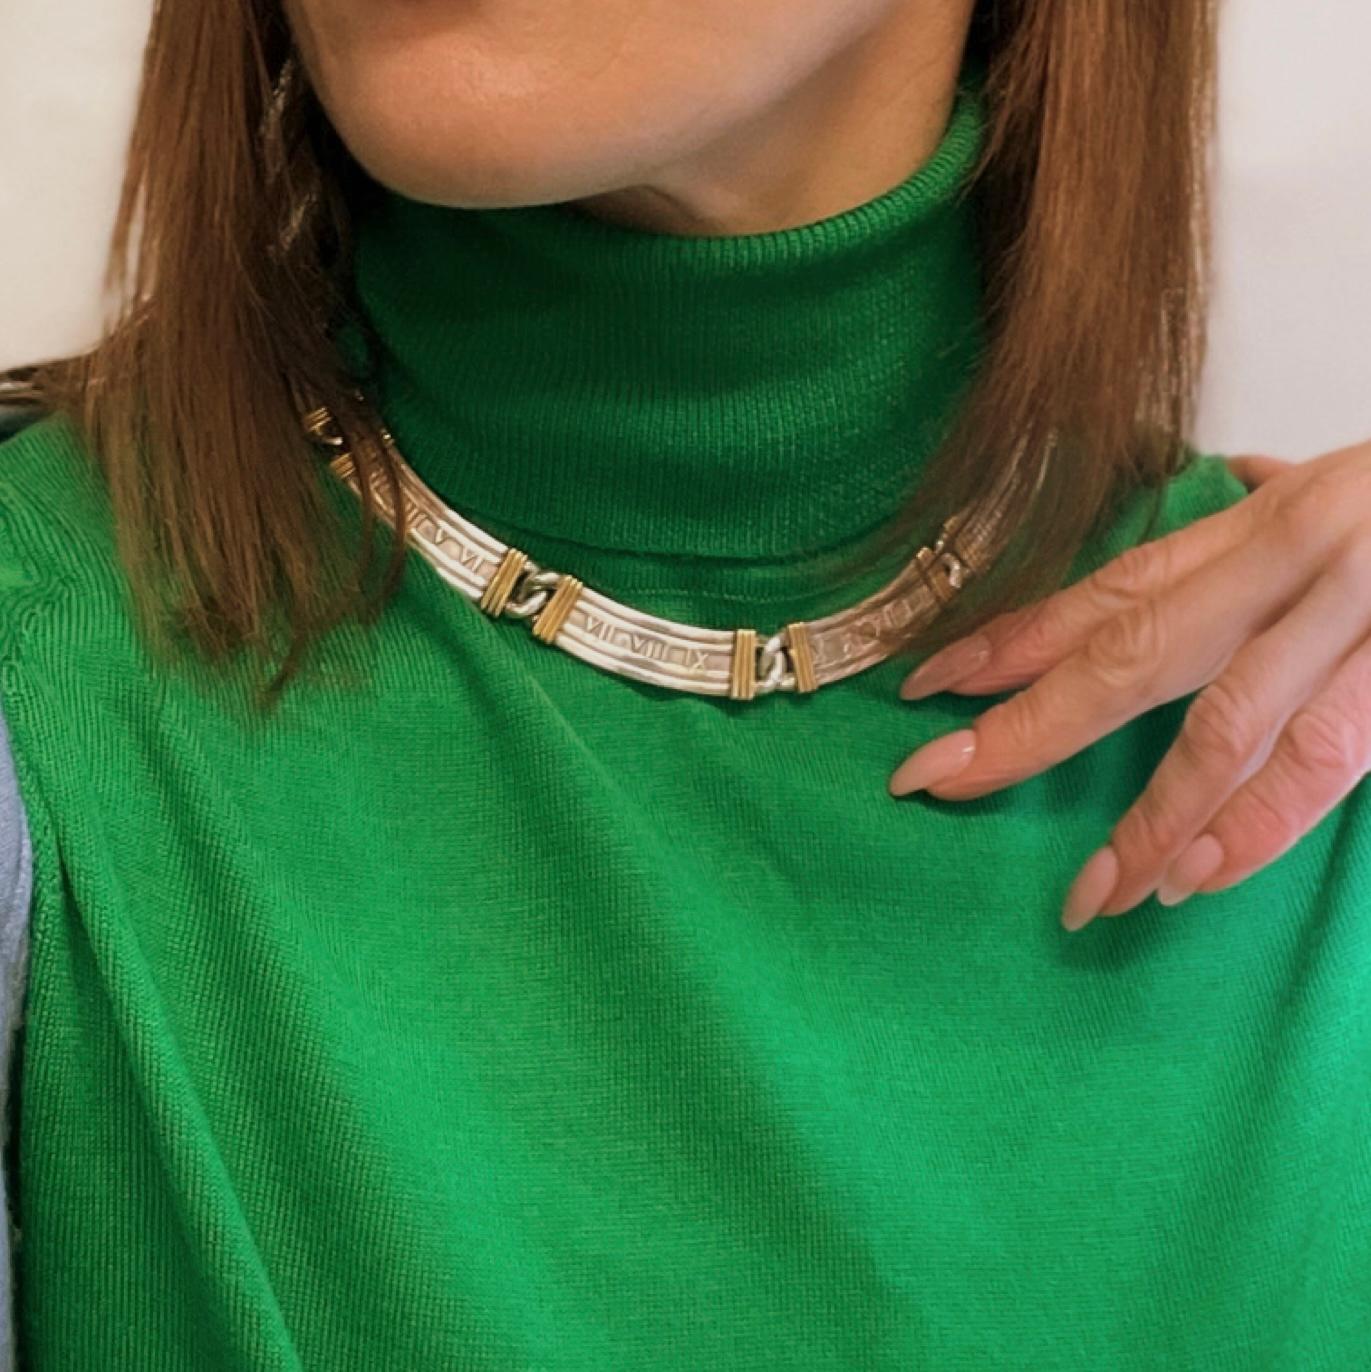 Tiffany & Co. 925 silver and 18kt. yellow gold ladies' Atlas Collar necklace with Roman Numerals.
Made in Italy, 1995 
Fully hallmarked with Tiffany & Co. 925 750 Italy 1995

Approx. Dimensions: 
Inner diameter: 12.5 cm
Width: 1.4 cm 
Weight: 129